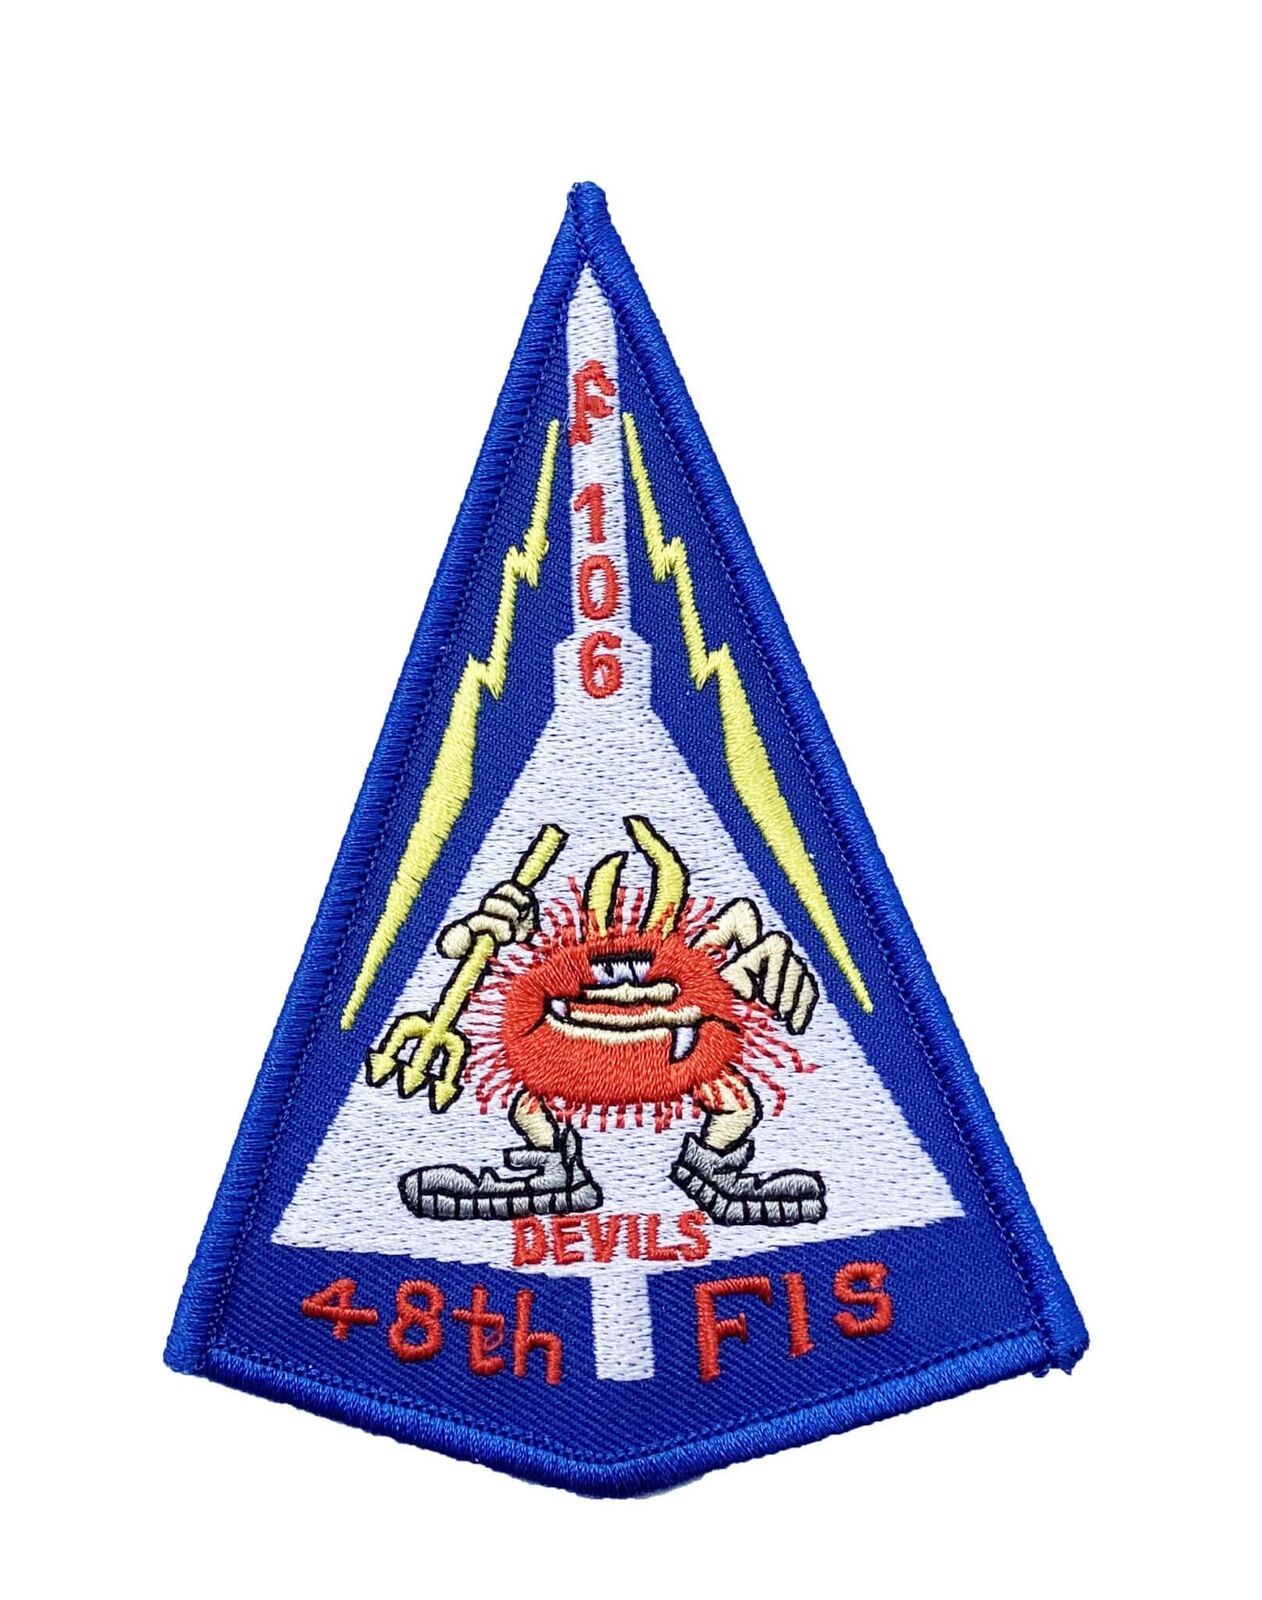 F-106 48th Fighter Interceptor Squadron Patch – Plastic Backing, Convair